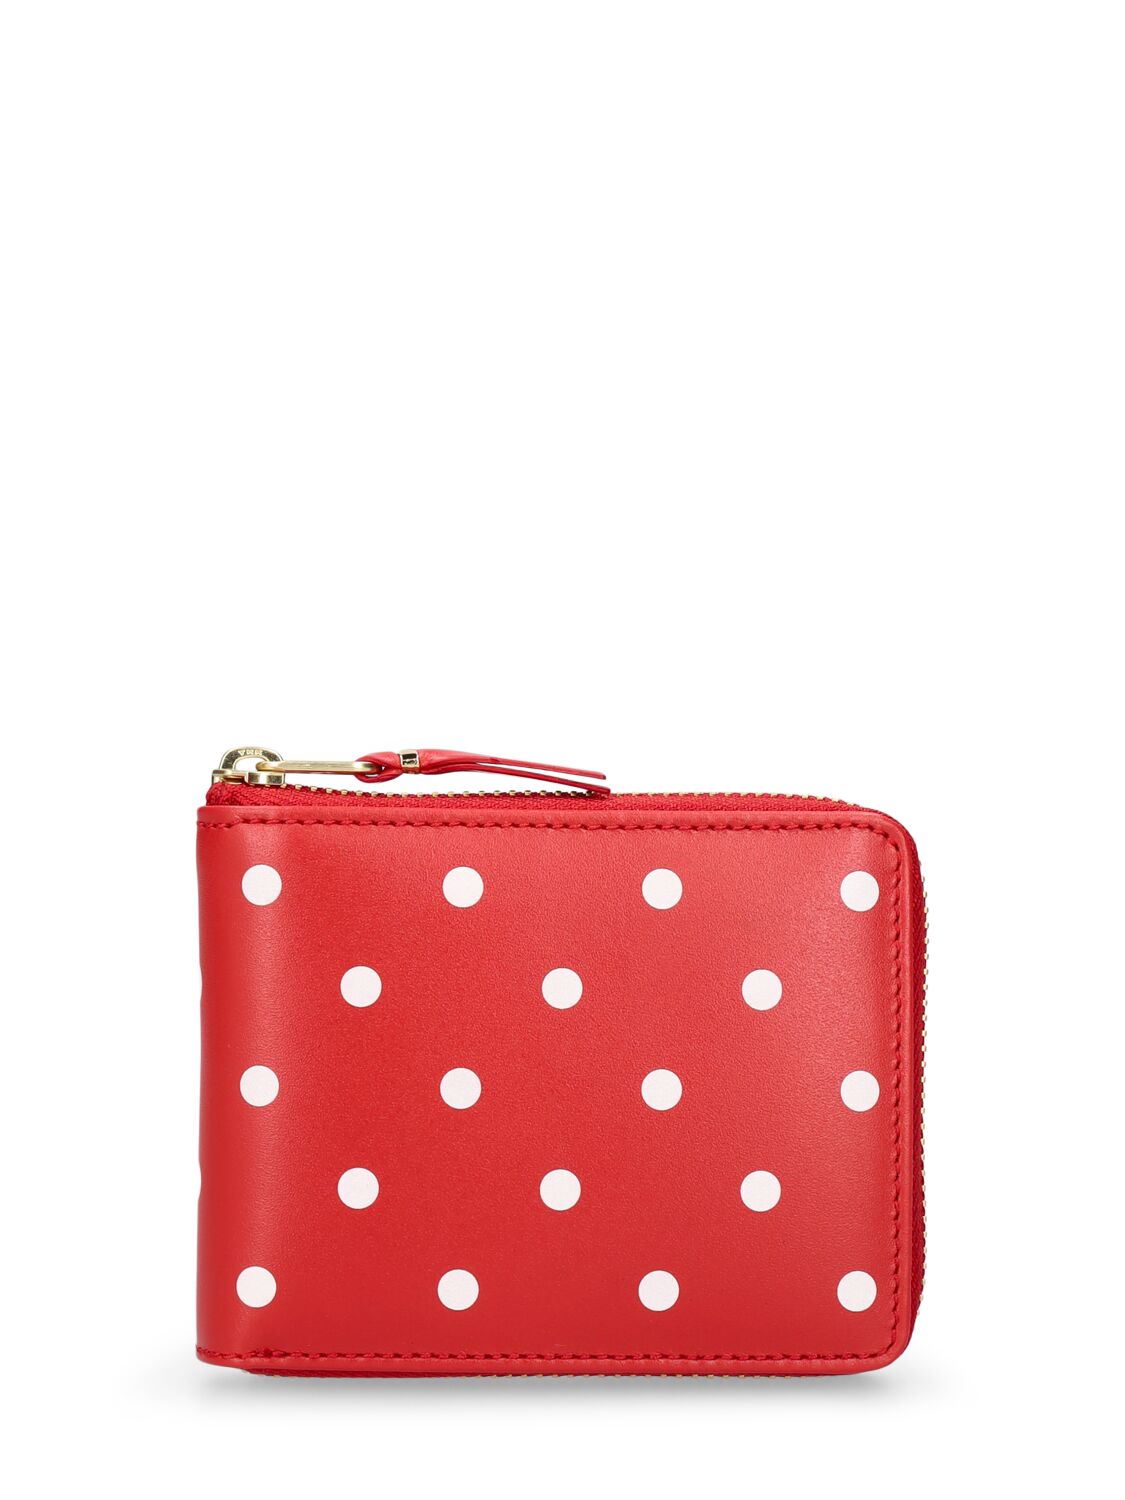 Comme Des Garçons Dot Printed Leather Zip Around Wallet In Red